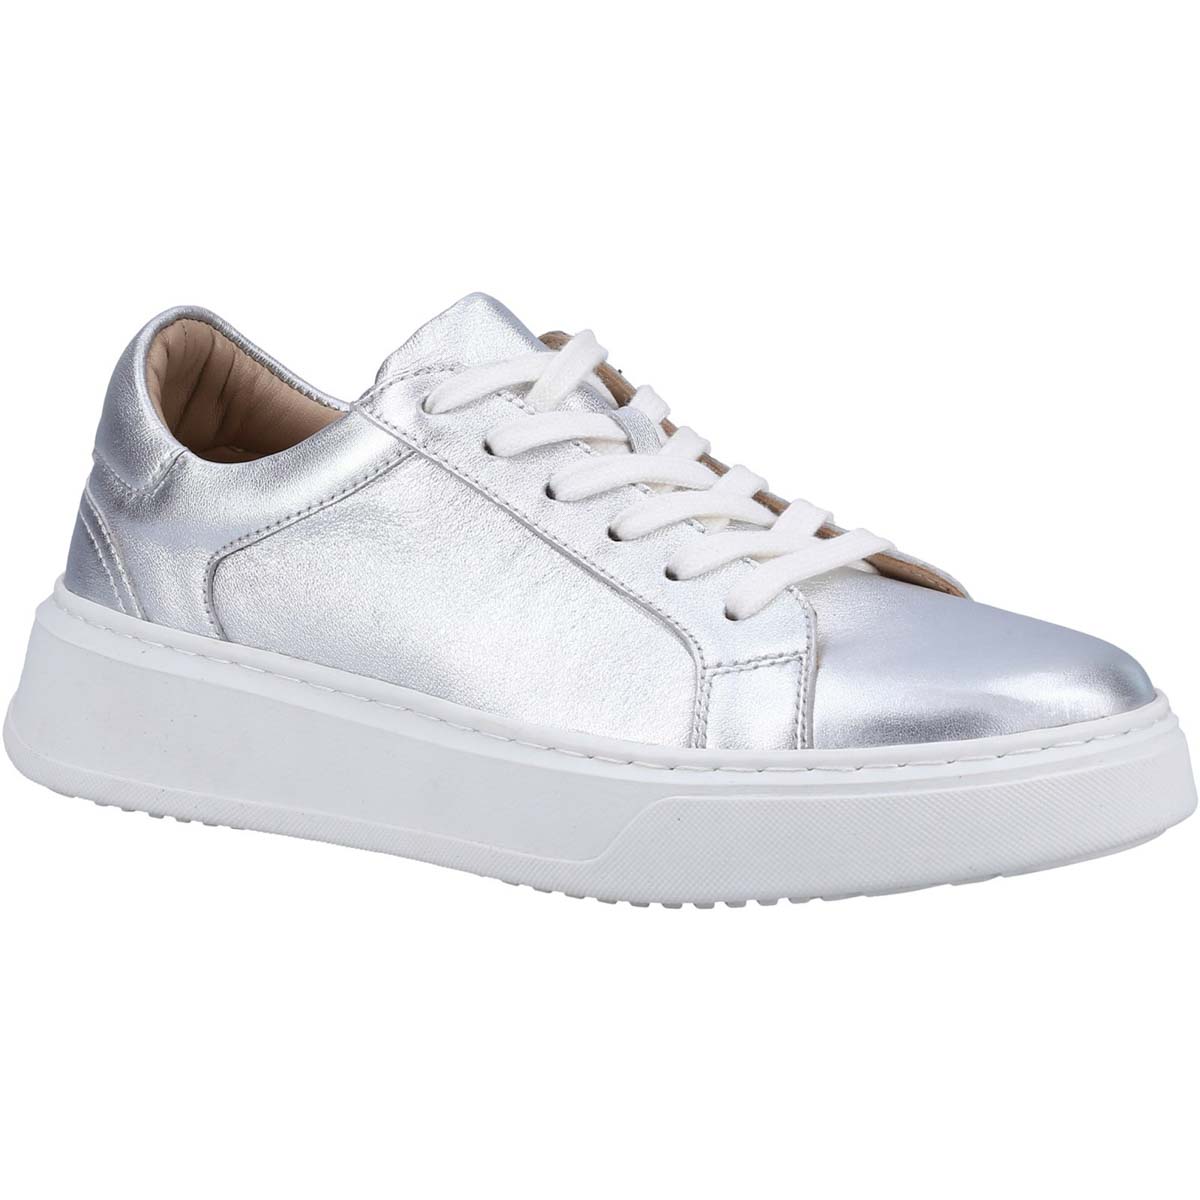 Hush Puppies Camille Silver Womens trainers 36580-68193 in a Plain Leather in Size 6